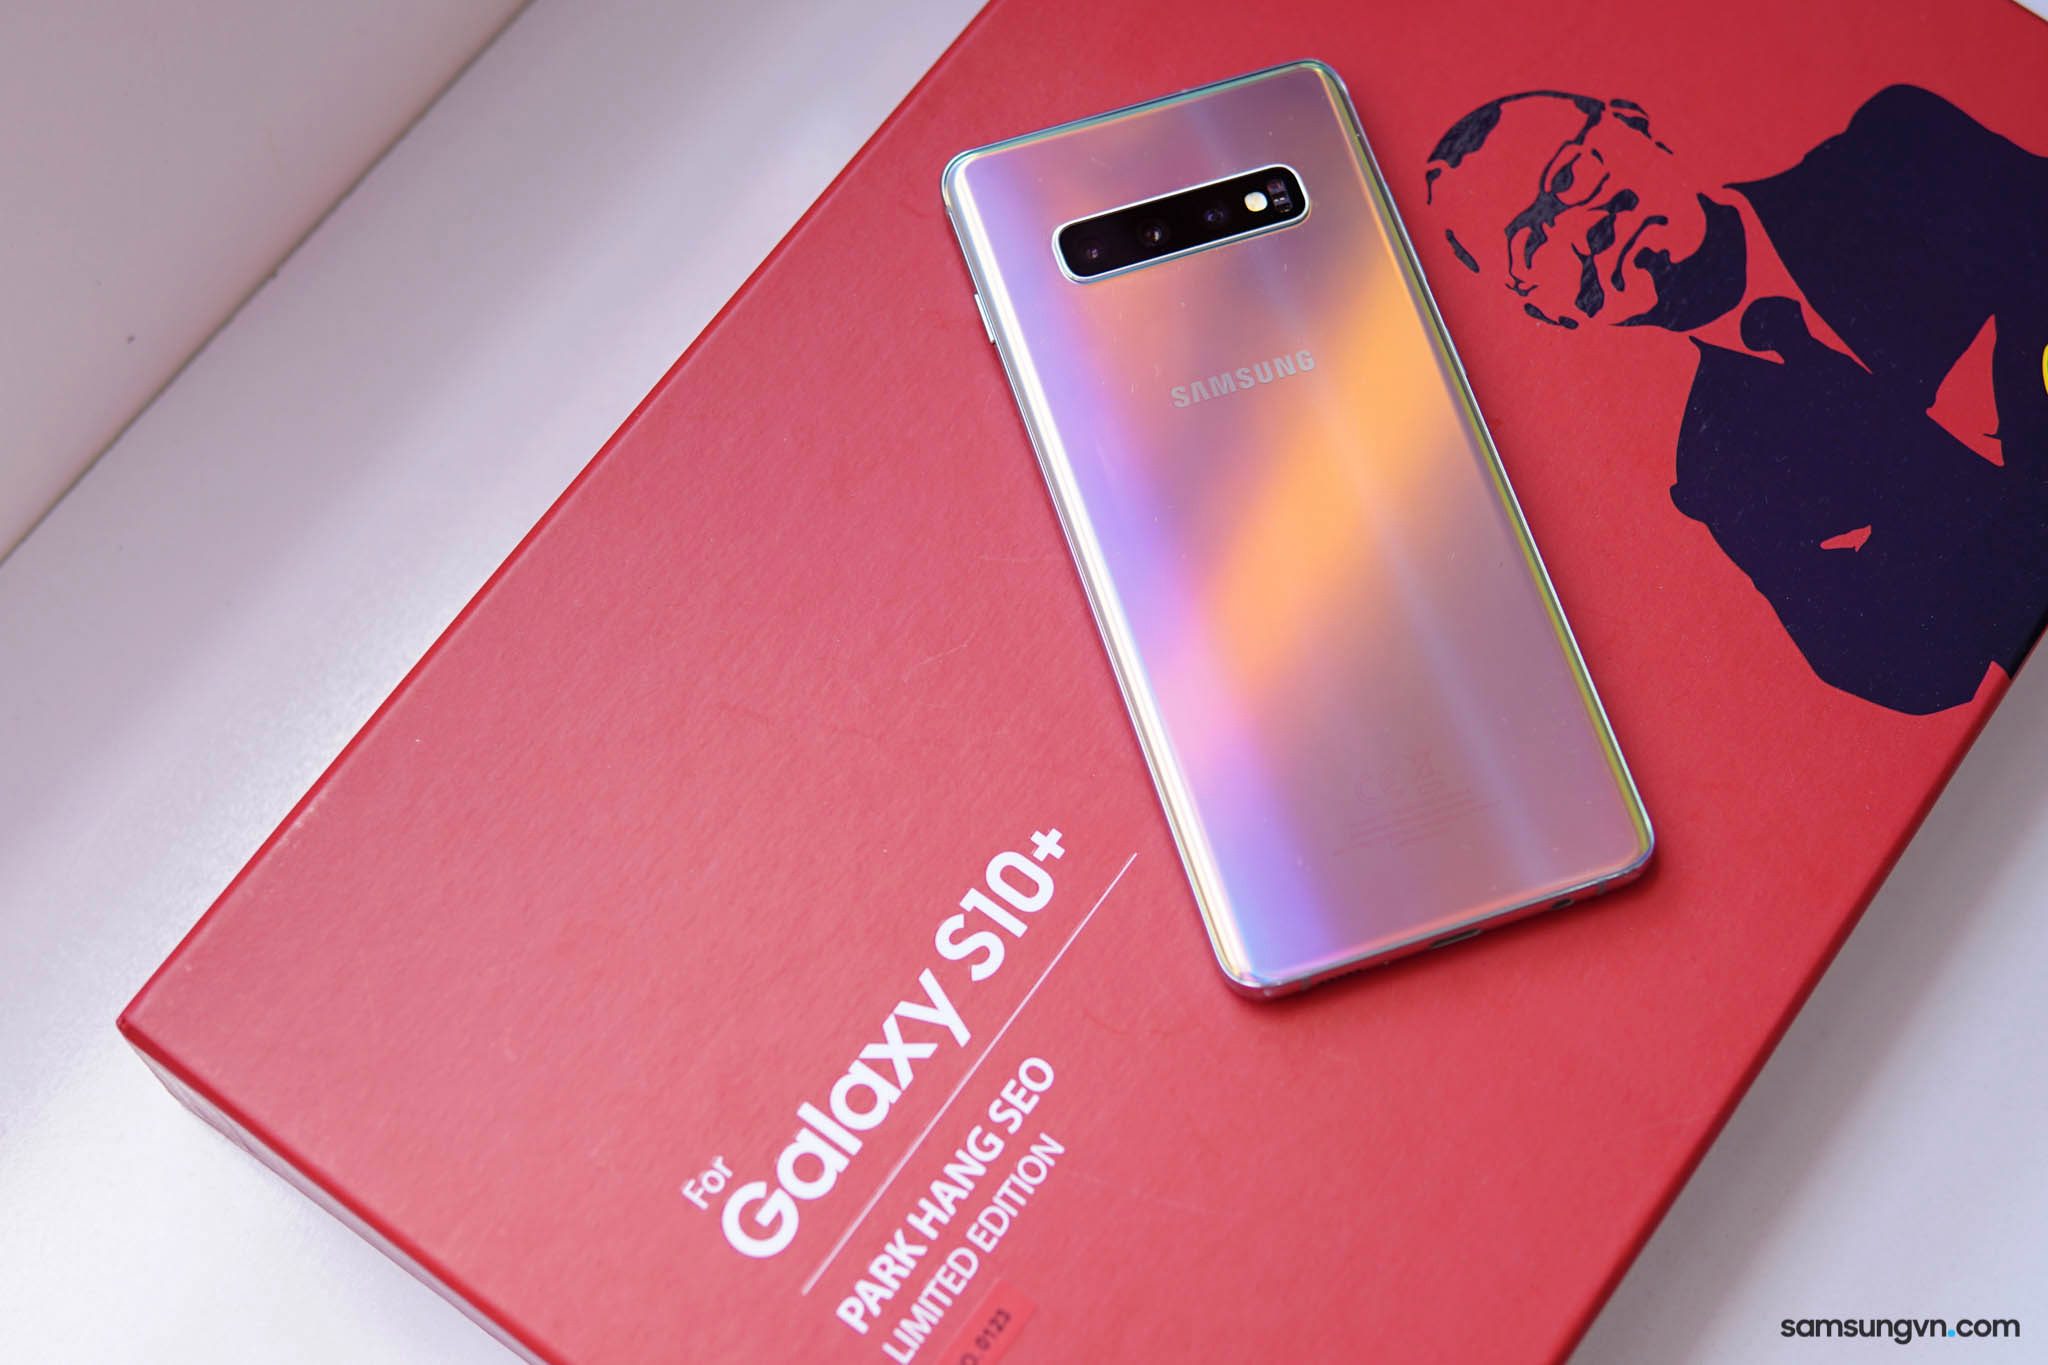 The Samsung Galaxy S10+ Prism Silver edition is headed to a new 